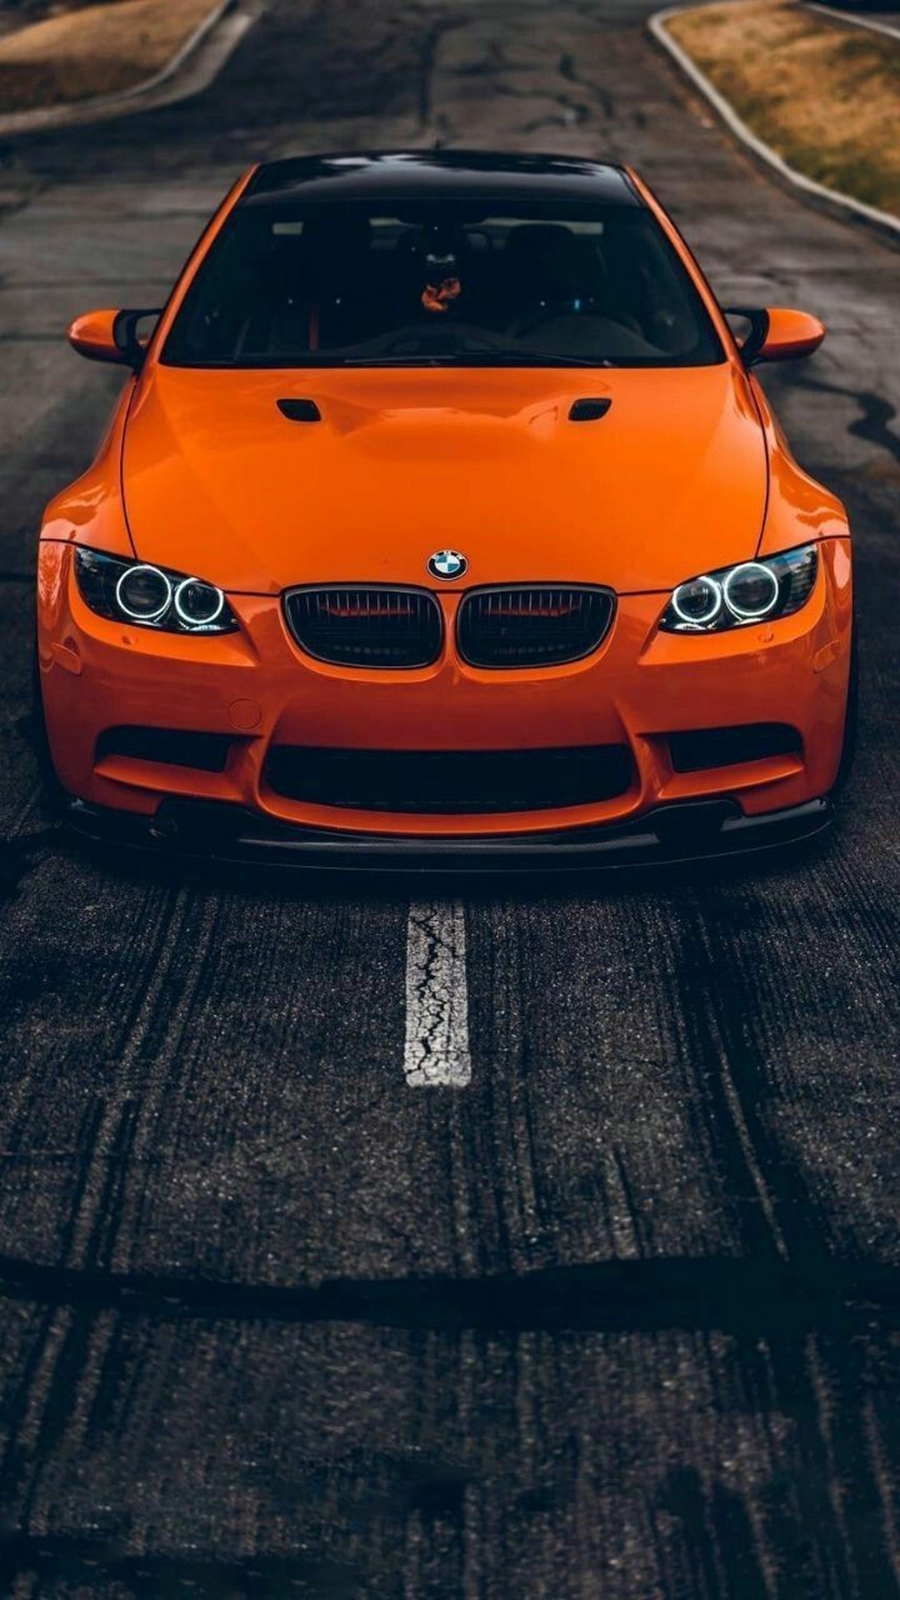 BMW Wallpapers for Mobile - Best Wallpapers (10) - Best Wallpapers